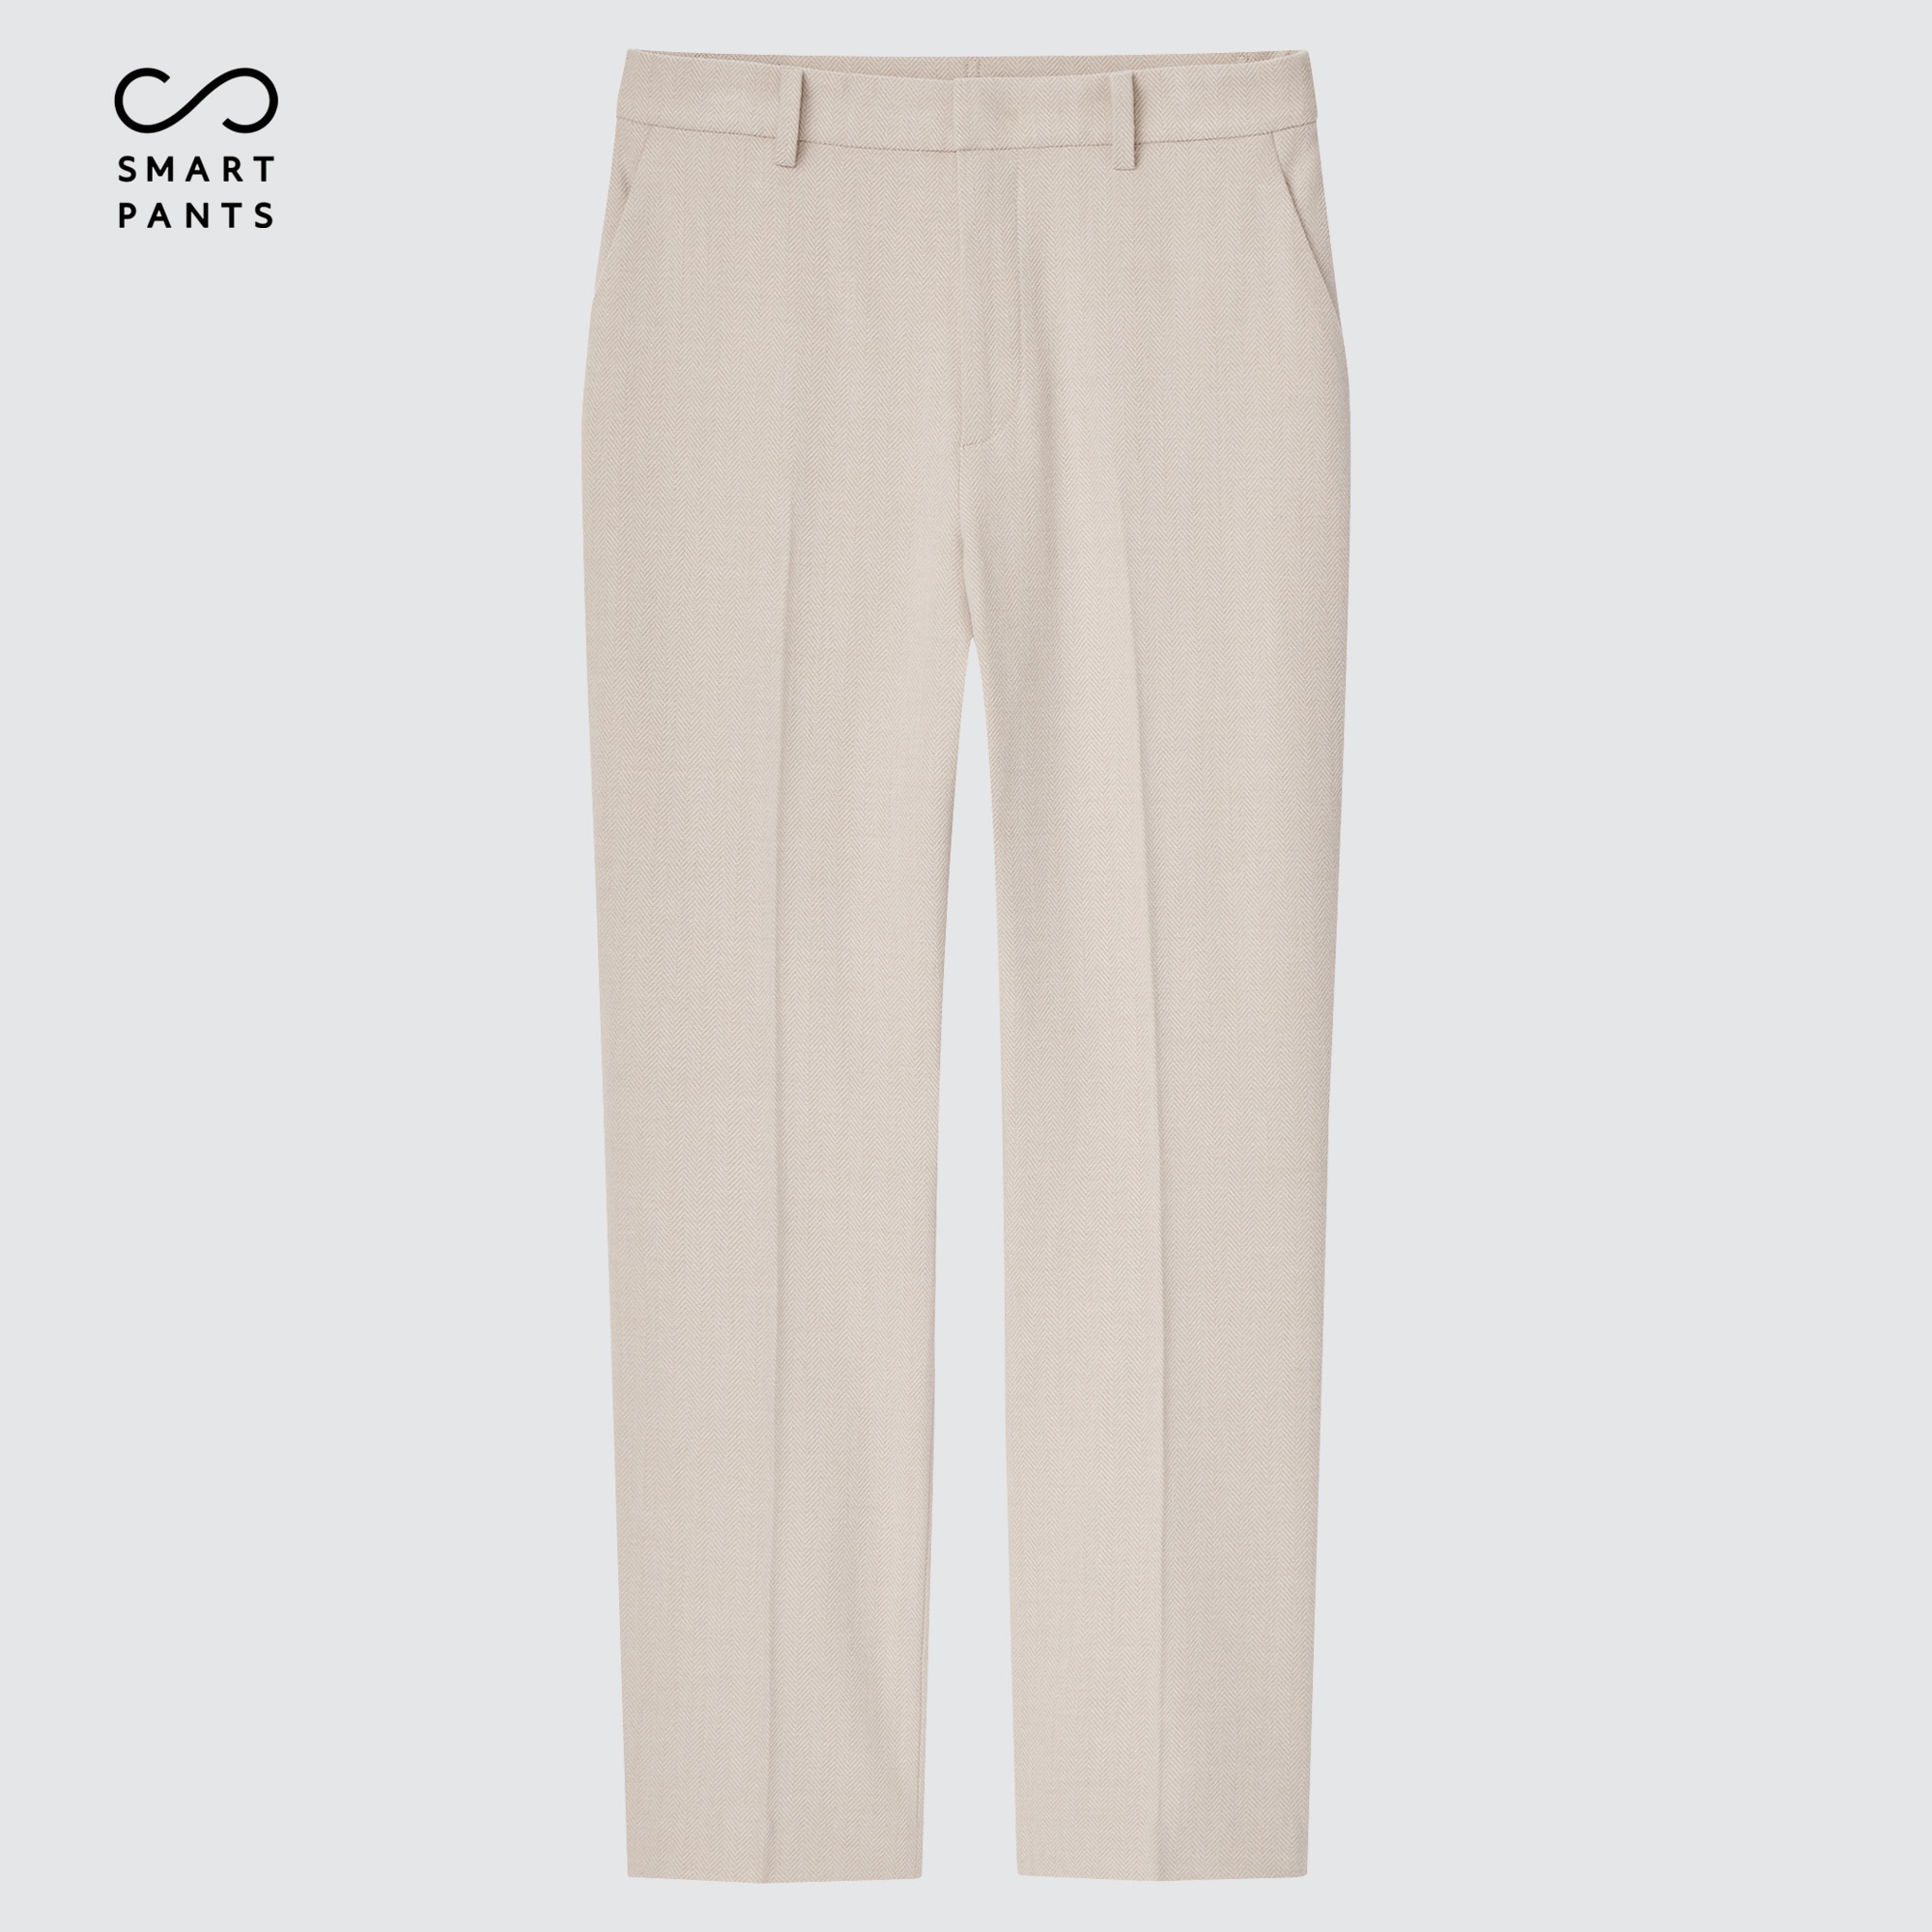 Smart 2-Way Stretch Brushed Ankle Pants